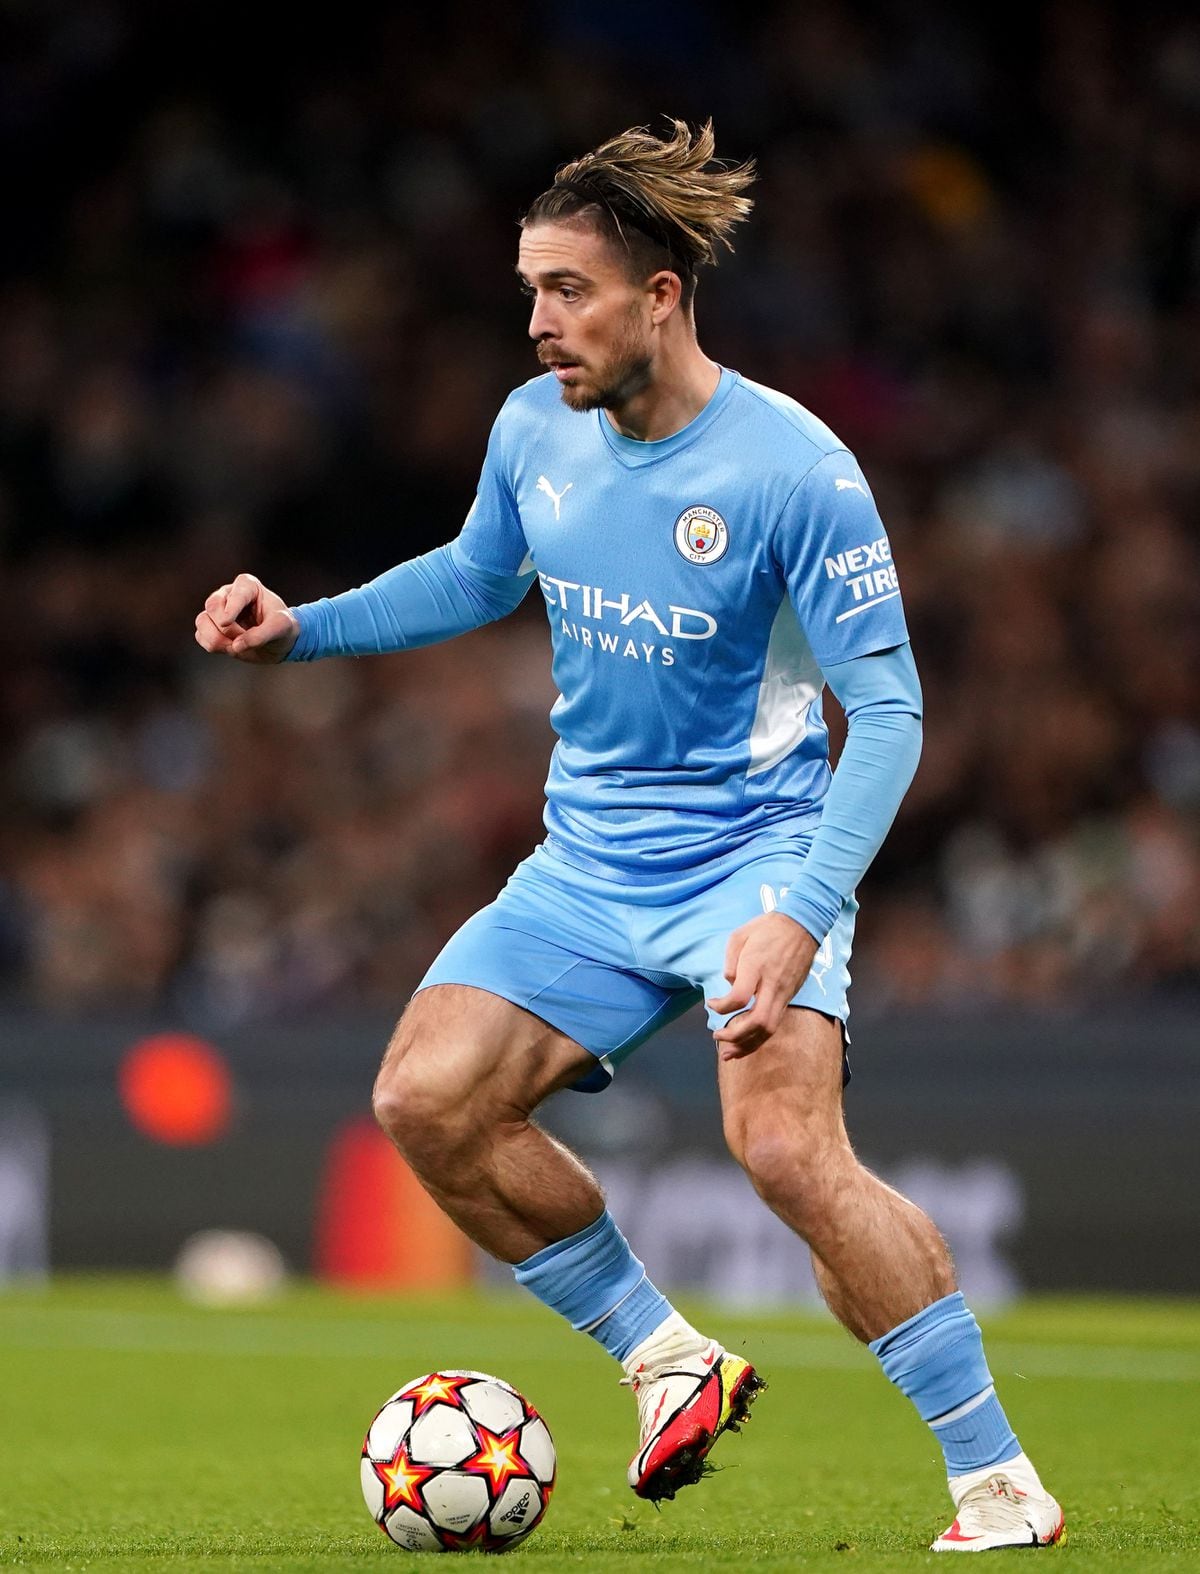 File photo dated 03-11-2021 of Manchester City's Jack Grealish who  could return for Manchester City to face former club Aston Villa on Wednesday. Issue date: Tuesday November 30, 2021. PA Photo. See PA story SOCCER Man City. Photo credit should read Zac Goodwin/PA Wire..